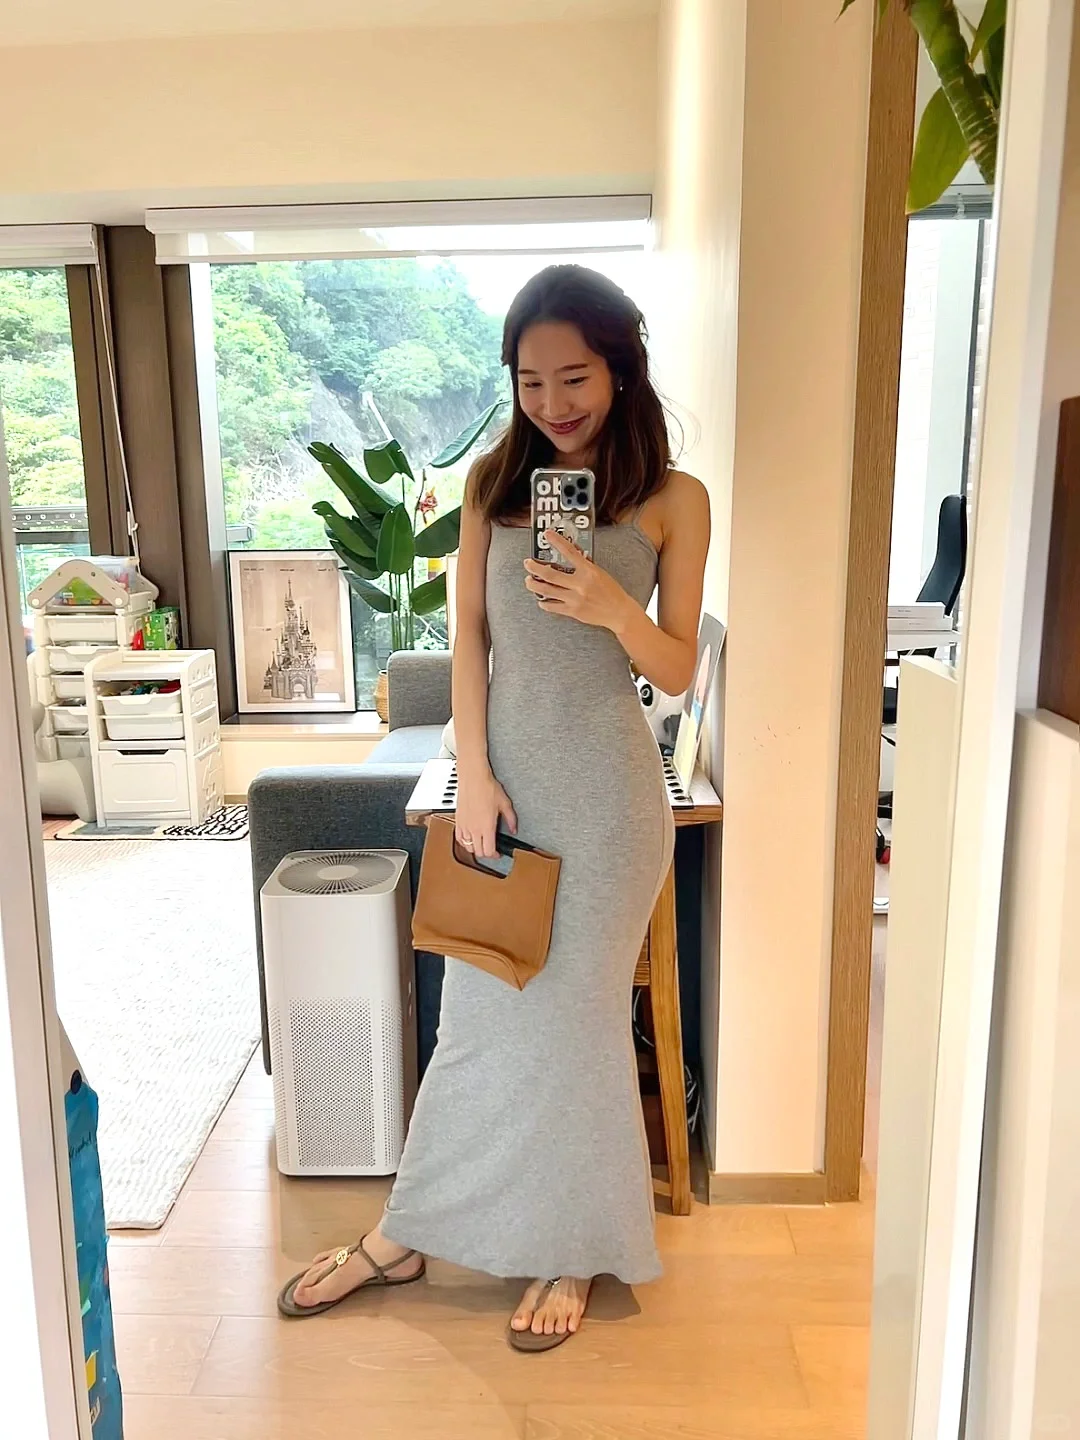 UNNIE Long Tube Hourglass Dress (Great For Pictures!)